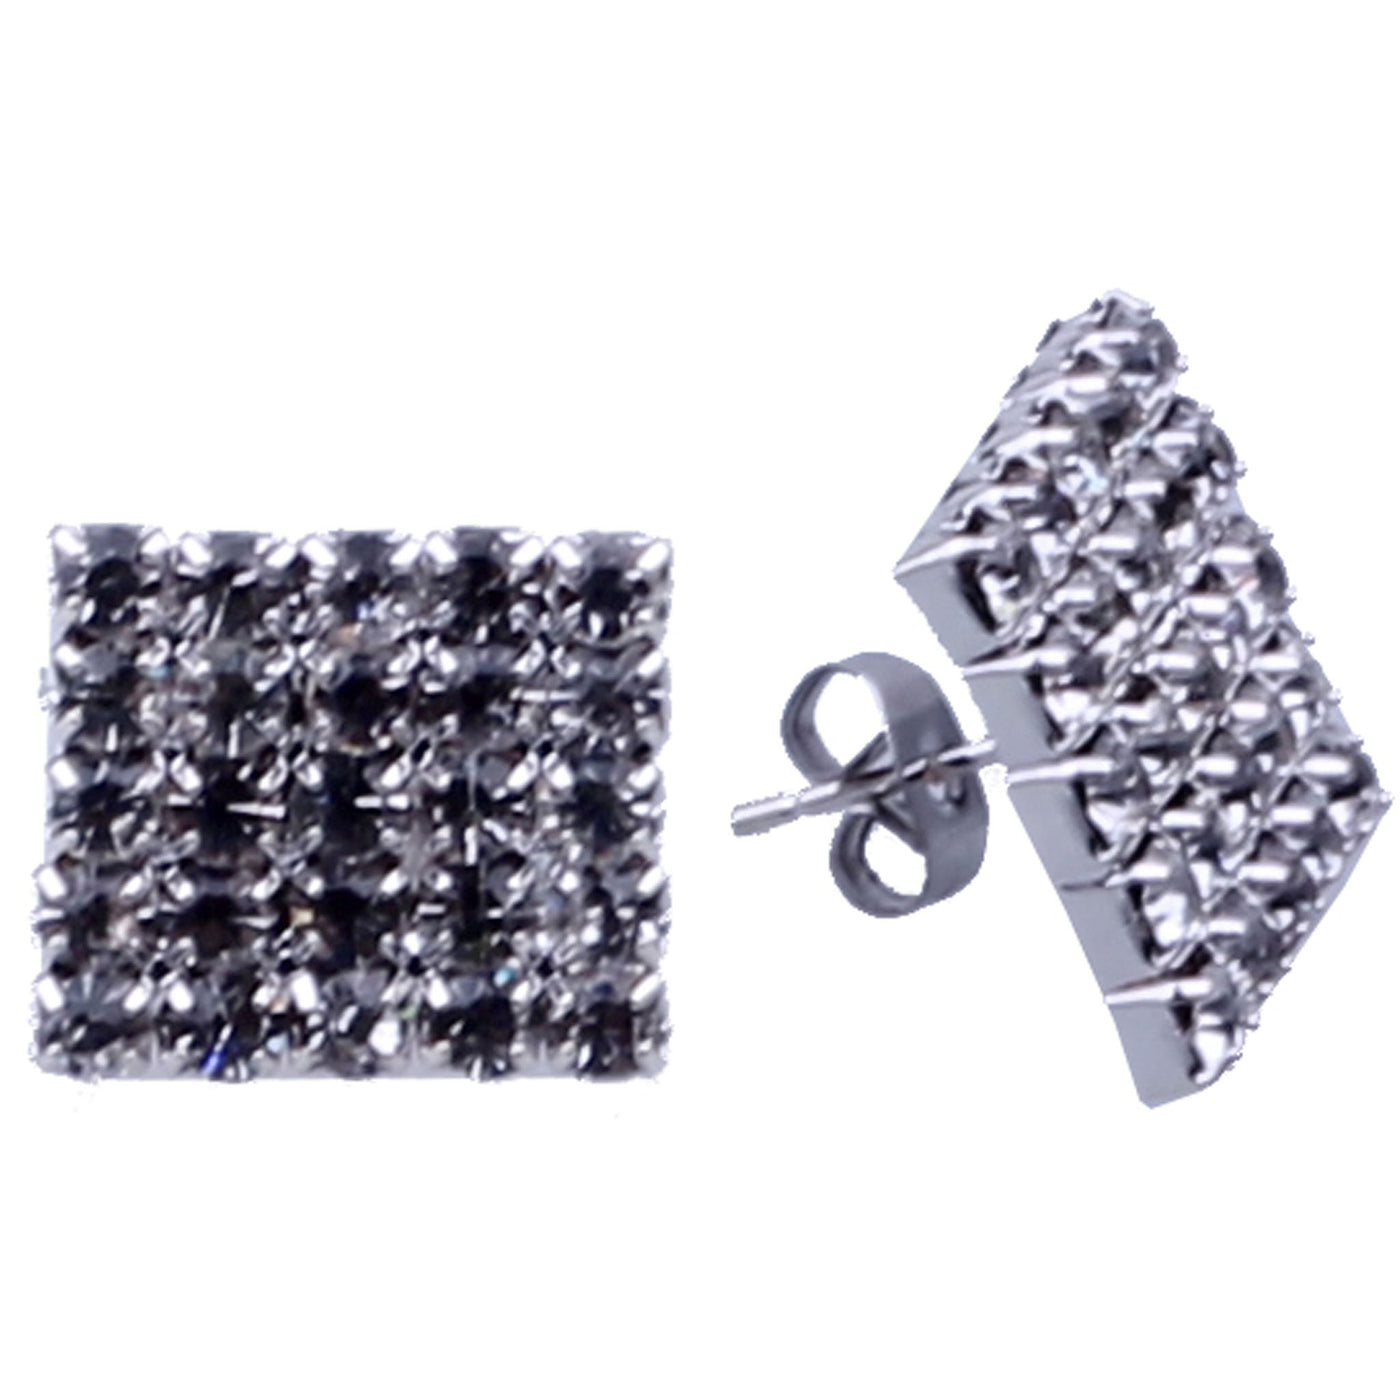 Square Straight earrings 5x5